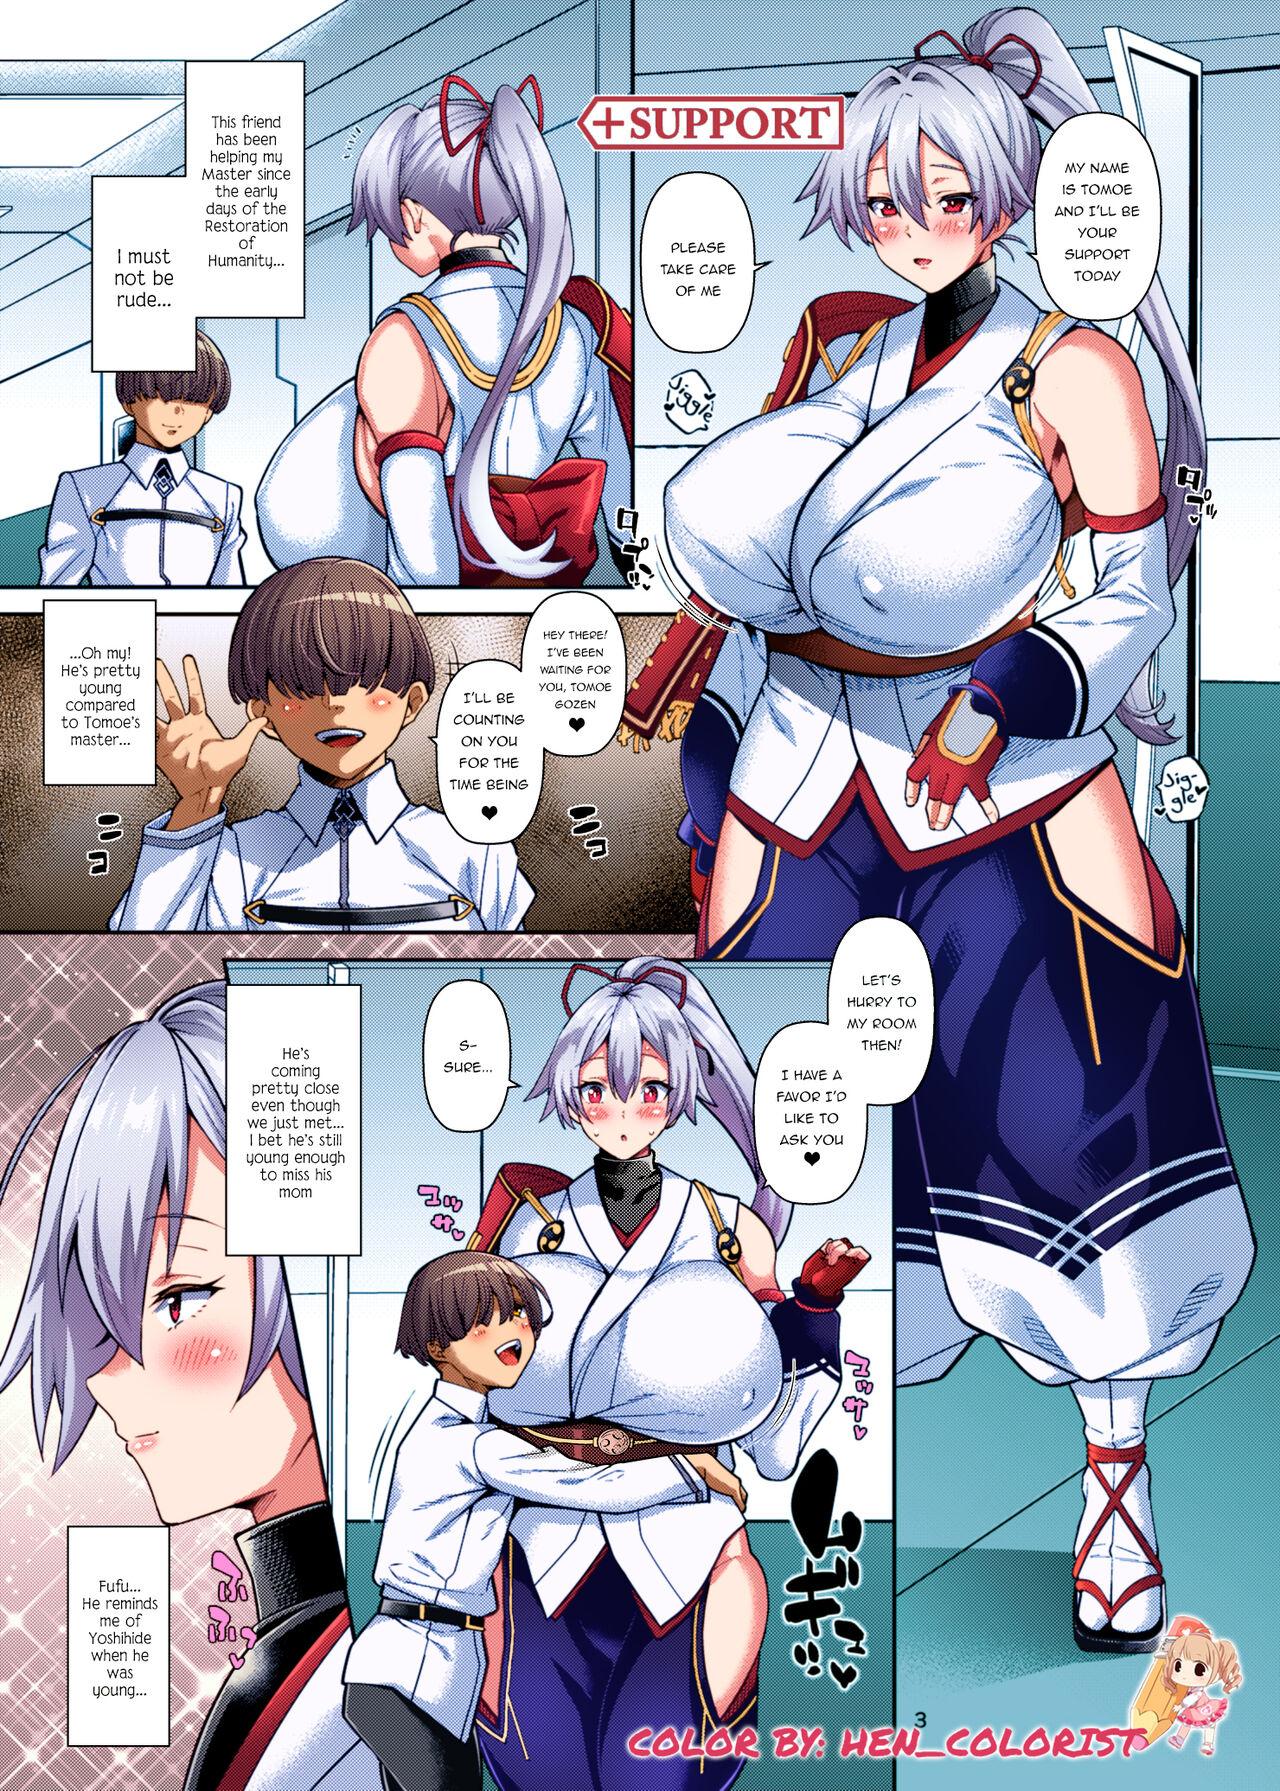 She Sex Support Zupposhi Gozen - Fate grand order Foot Job - Page 2